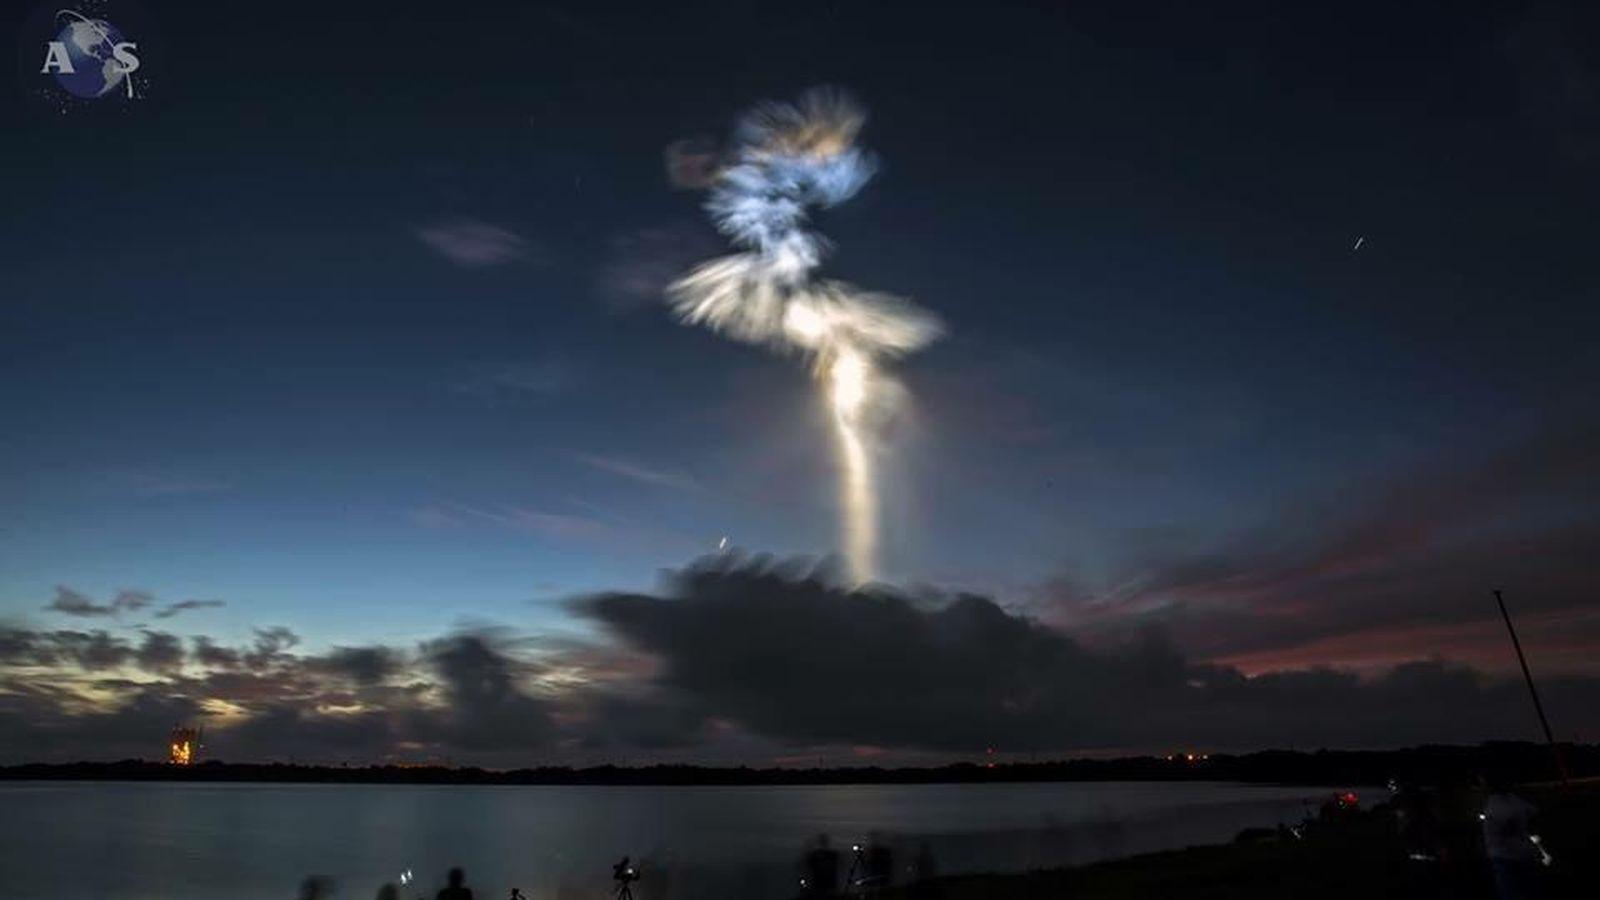 This morning's Atlas V rocket launch made a beautiful multi